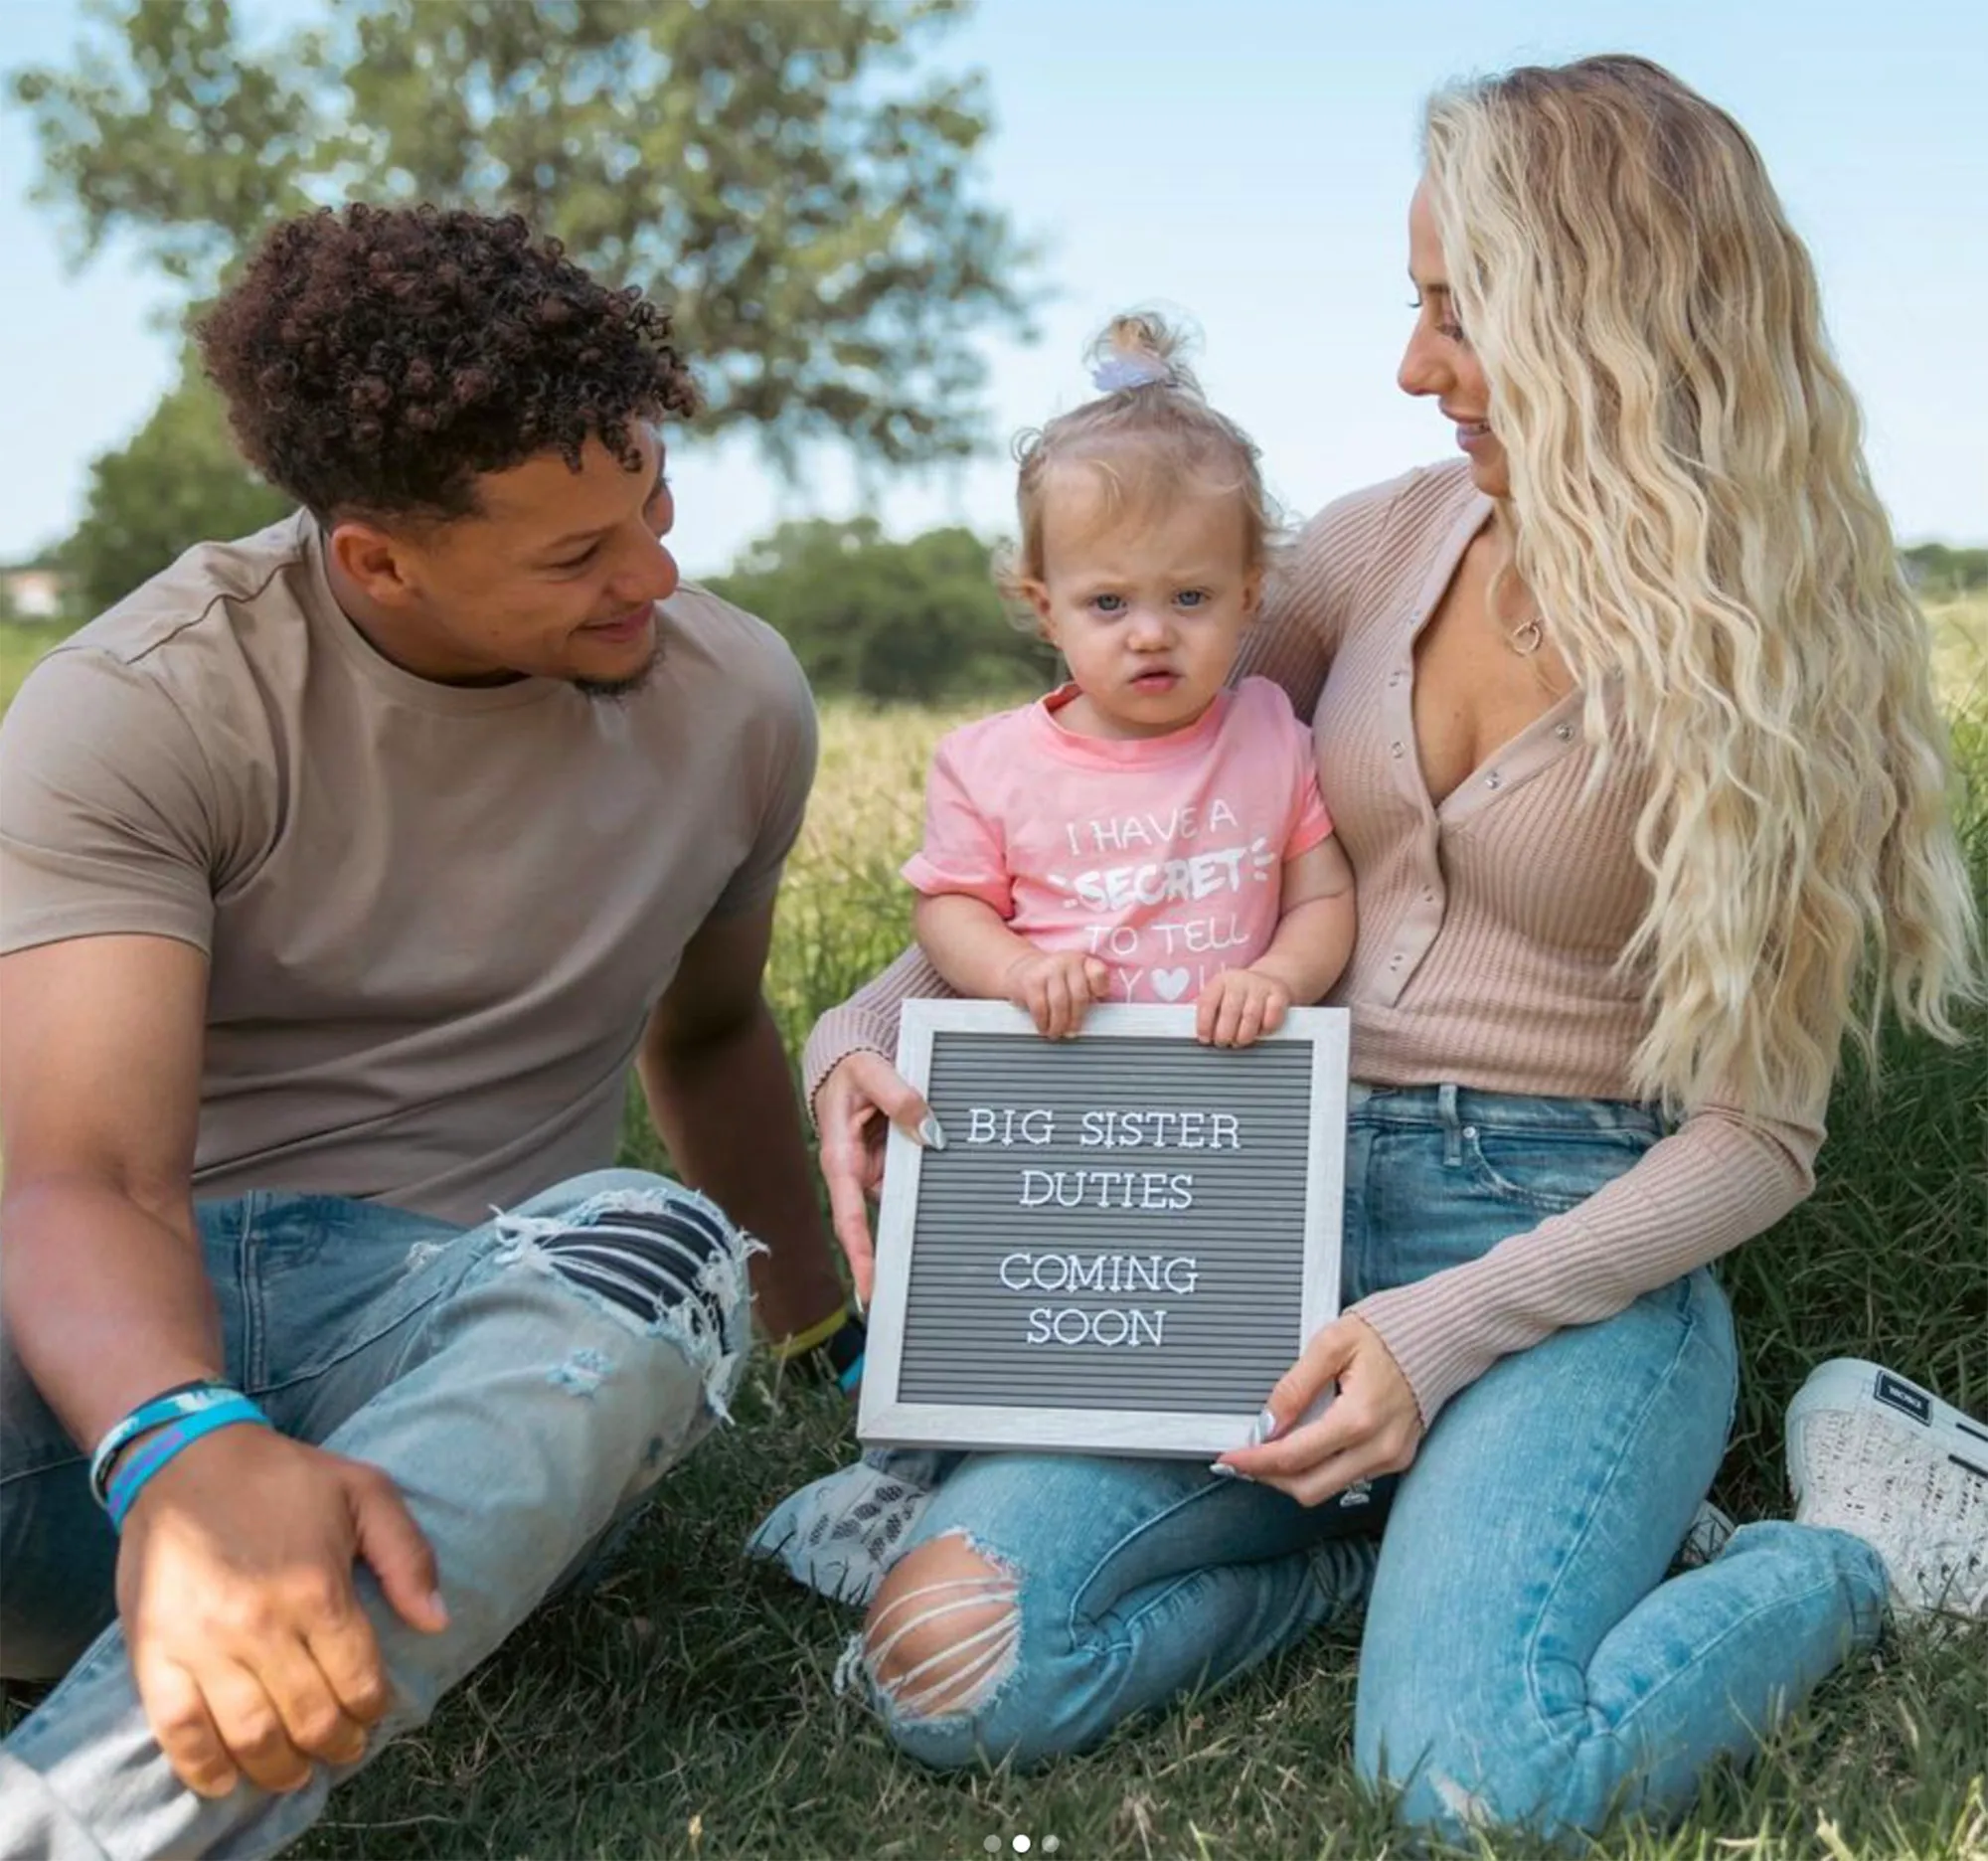 Patrick Mahomes and his wife, Brittany Mahomes, have officially confirmed their long-awaited news